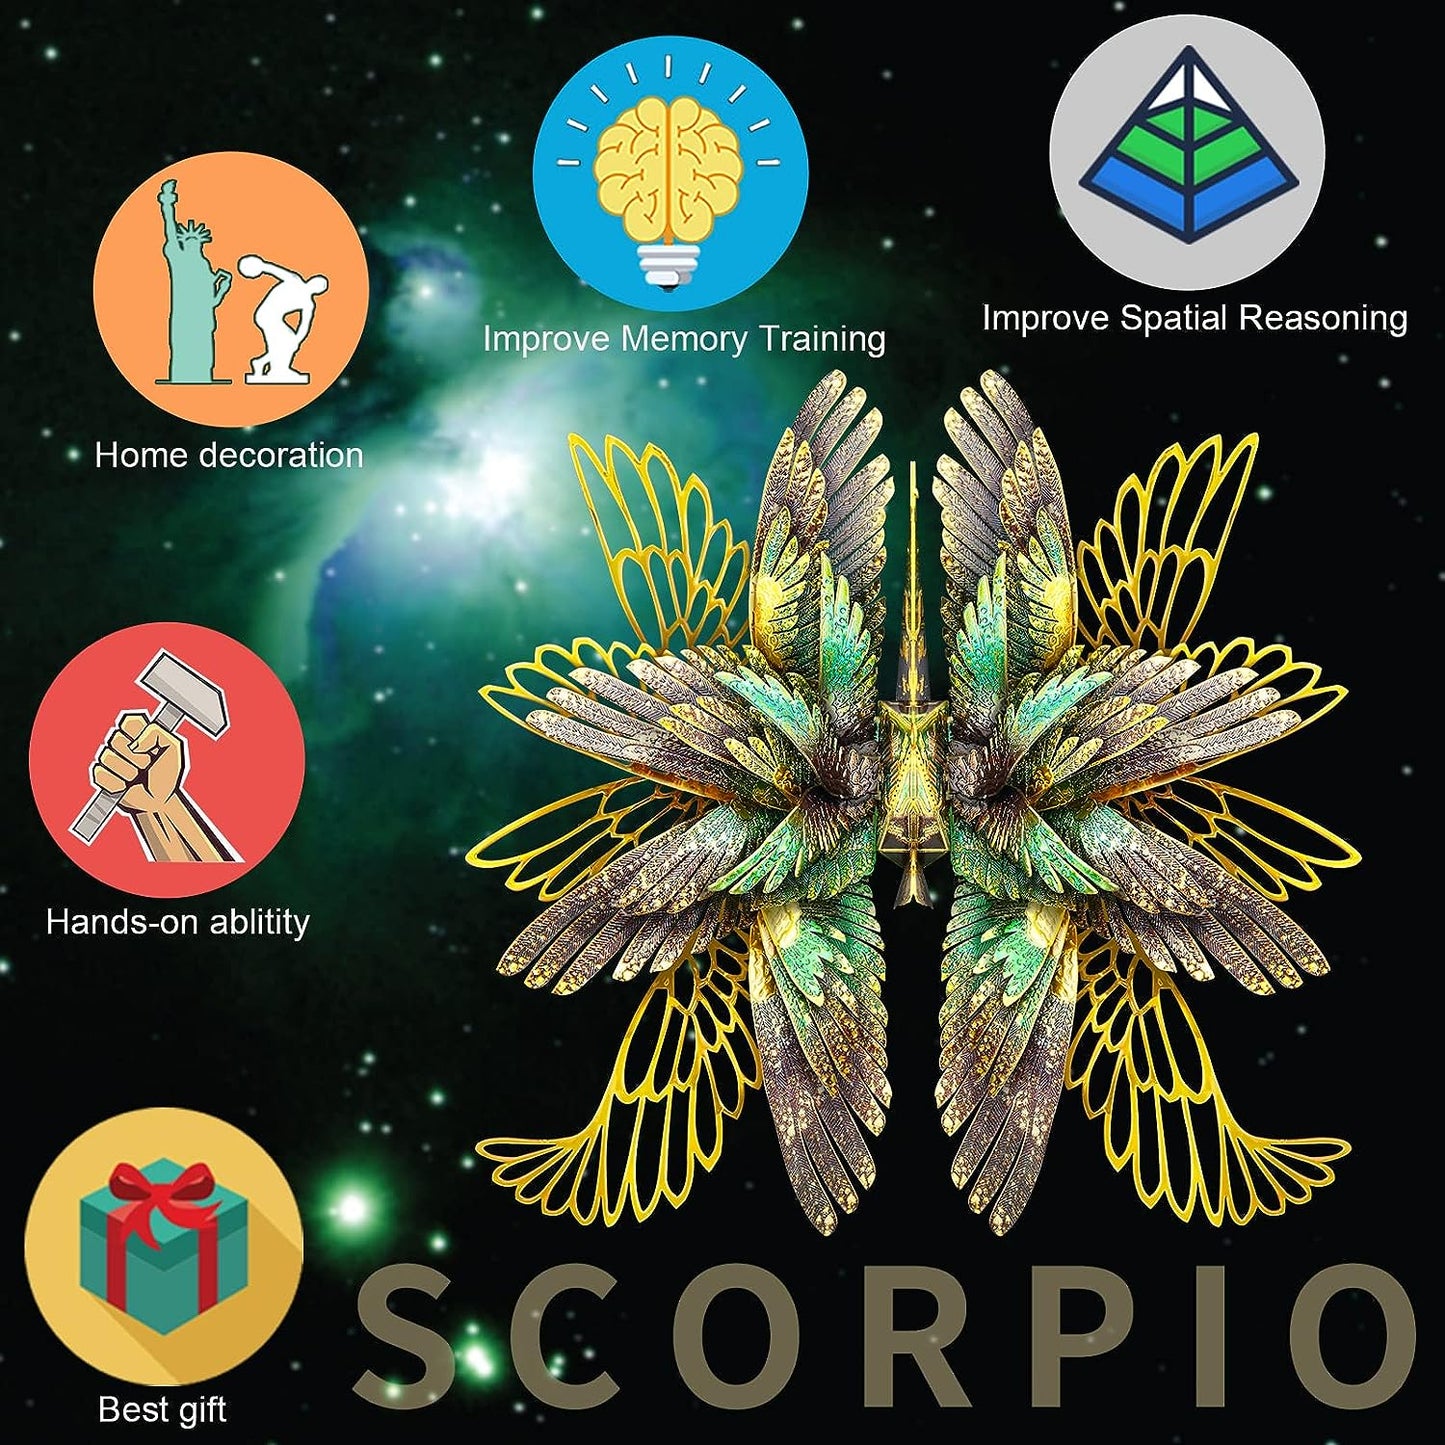 Piececool Metal Earth Scorpio Wish Cranes 3D Puzzles for Adults